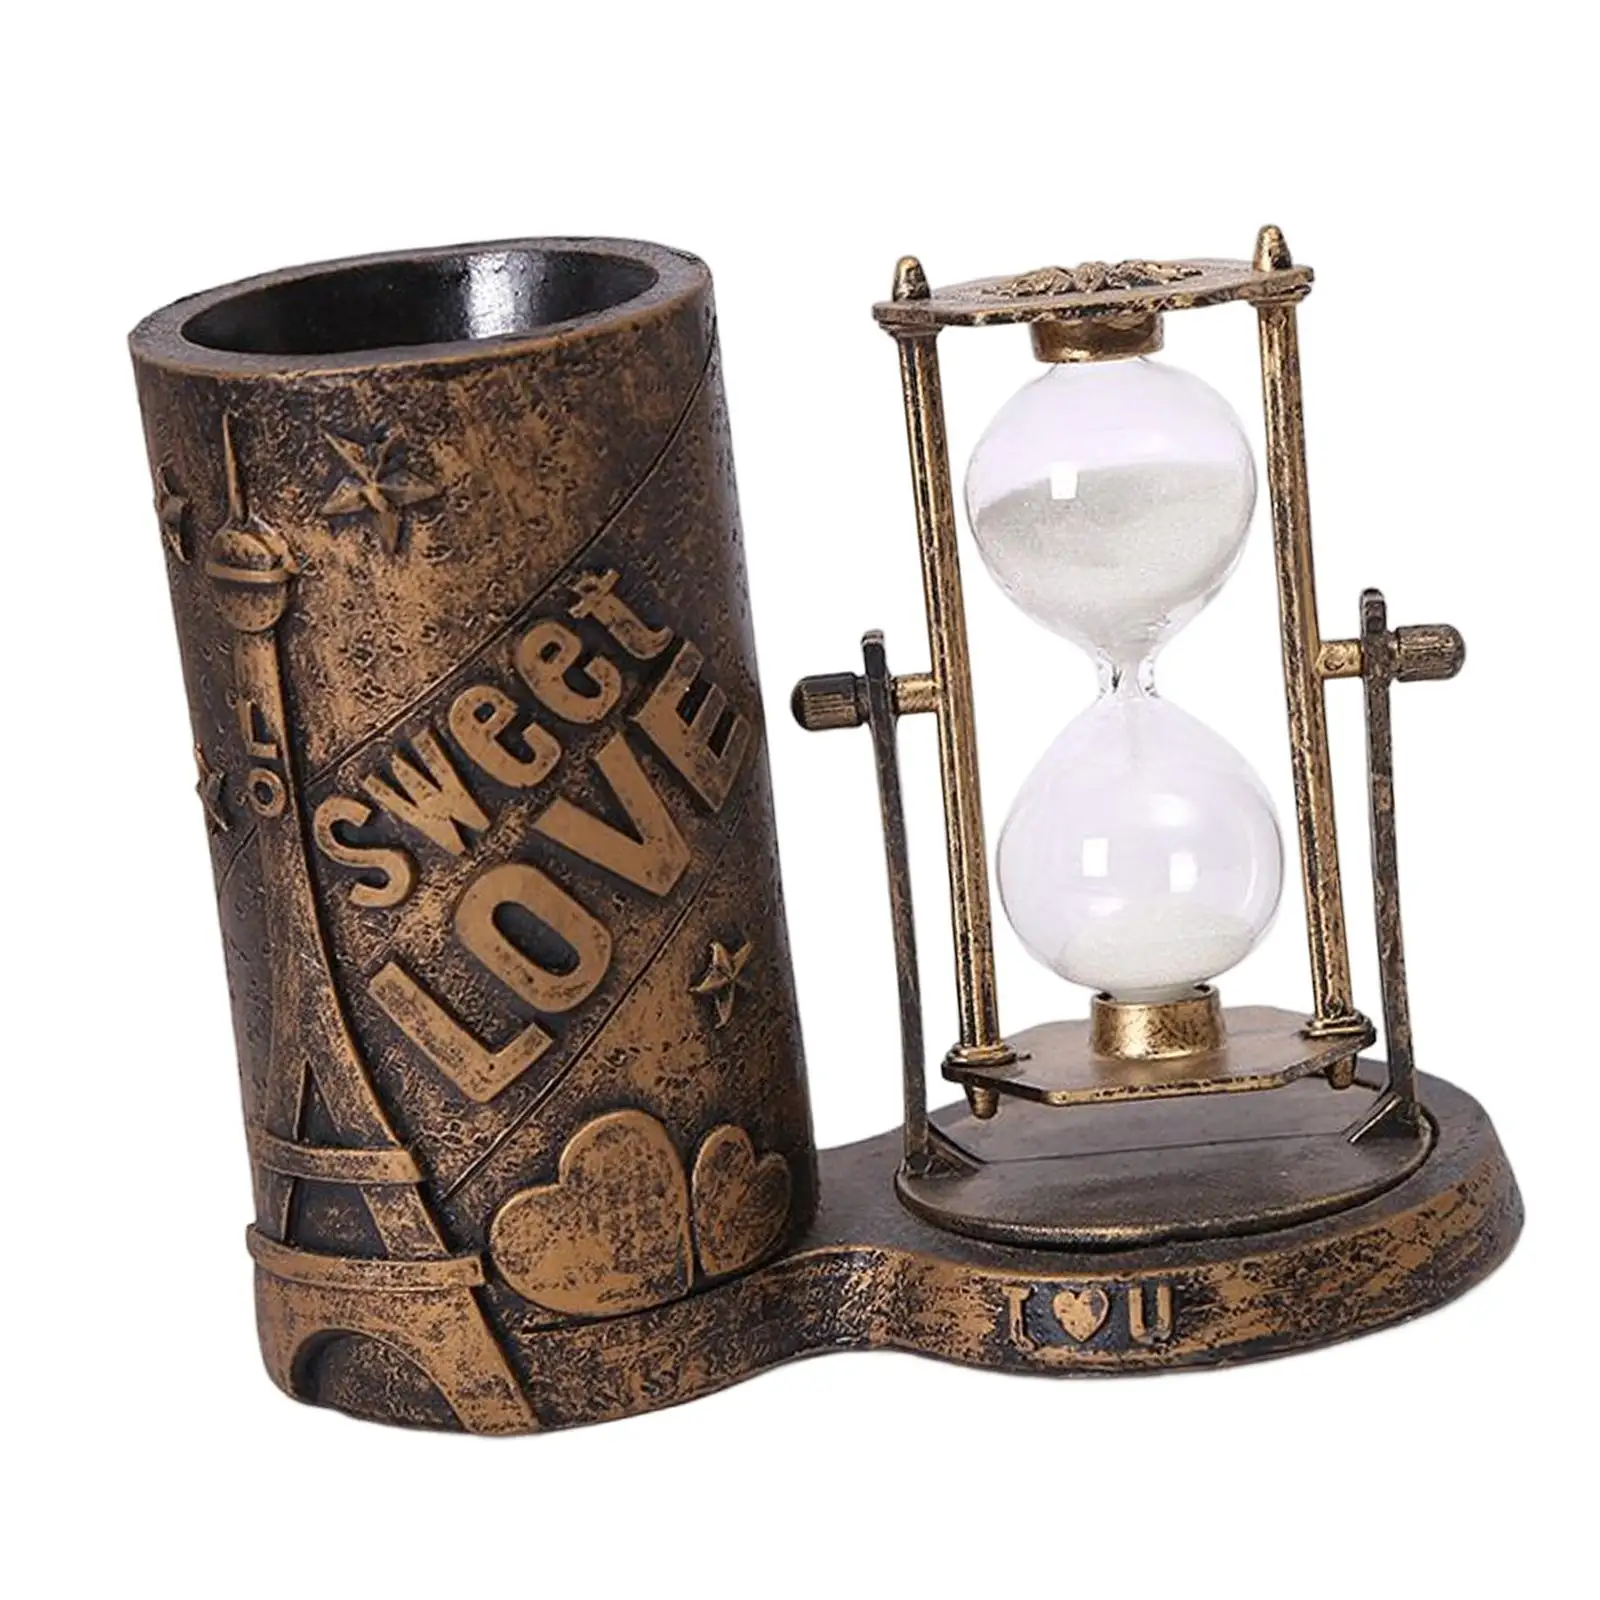 Pen Holder Collectible Crafts Art Hourglass Decoration Sand Timer Decor for Festivals Birthday Living Room Decoration Cabinet